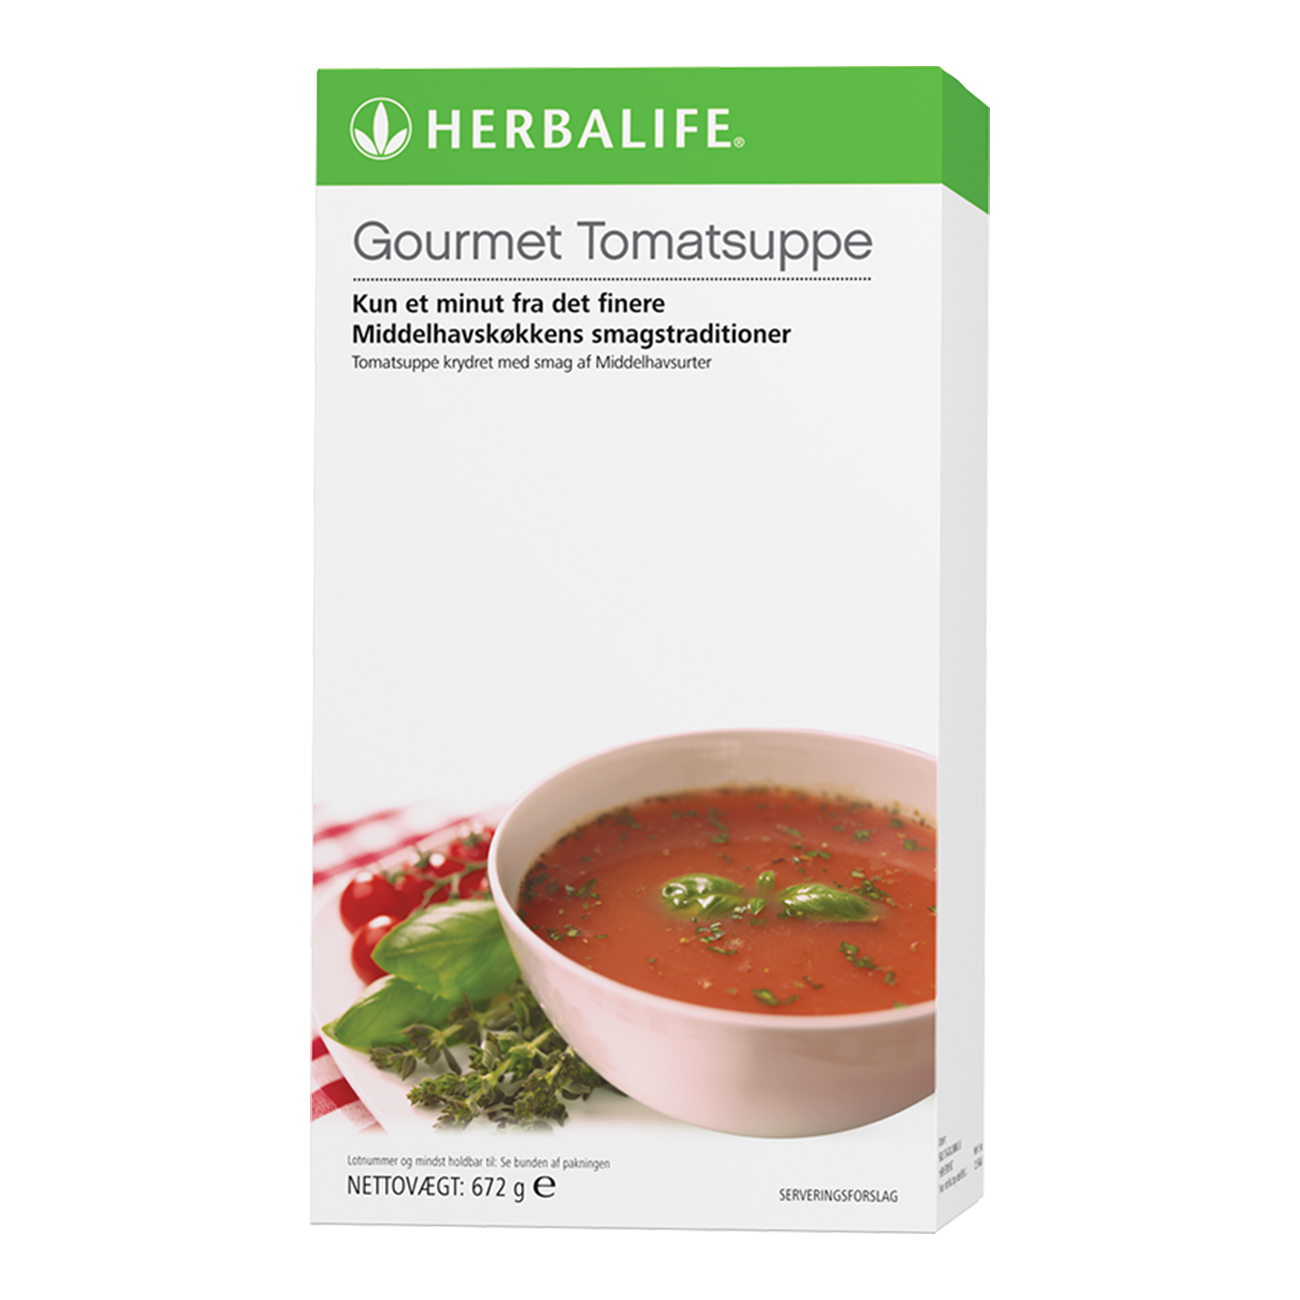 Gourmet Tomato Soup Proteinsnack product